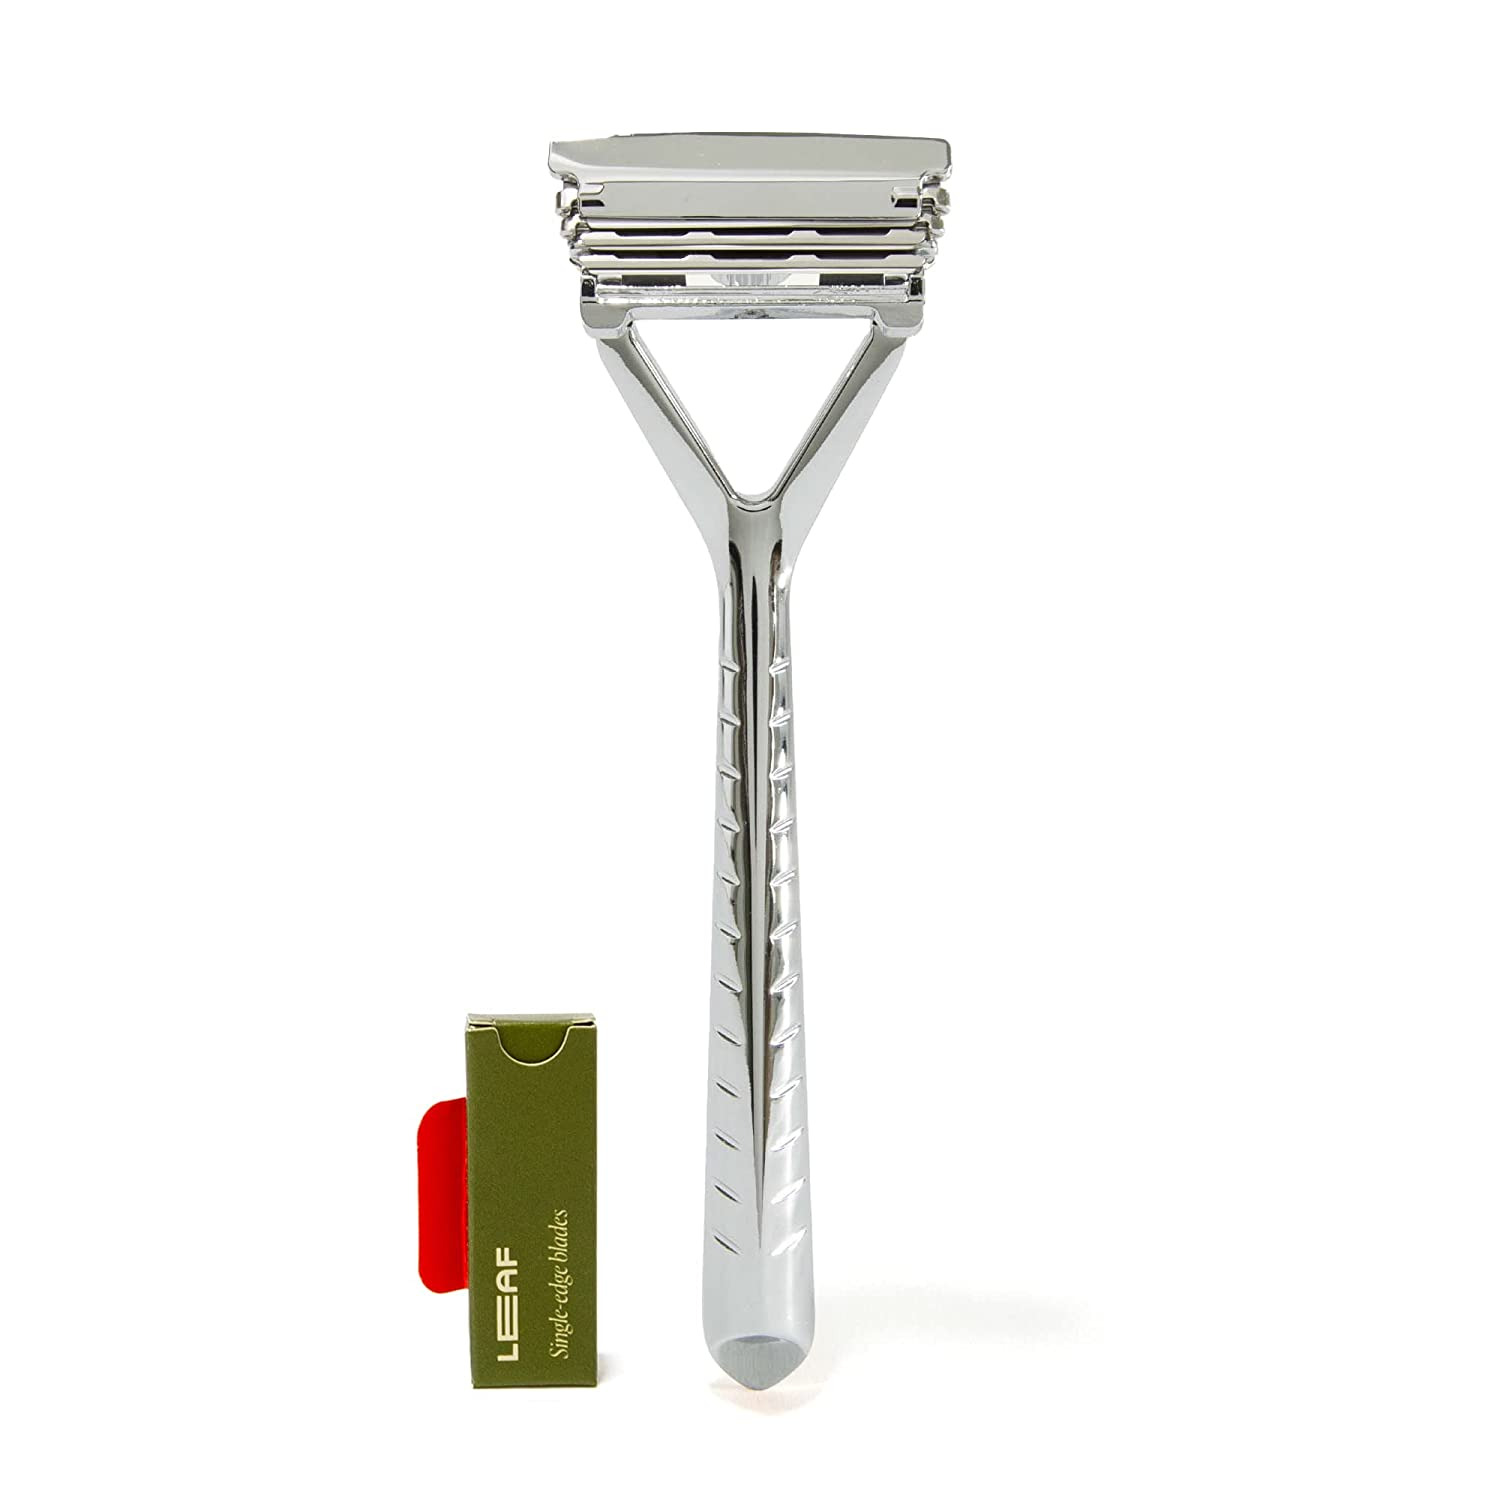 The Leaf Razor (Chrome) - Eco Friendly Body and Head Shaver with Pivoting Head